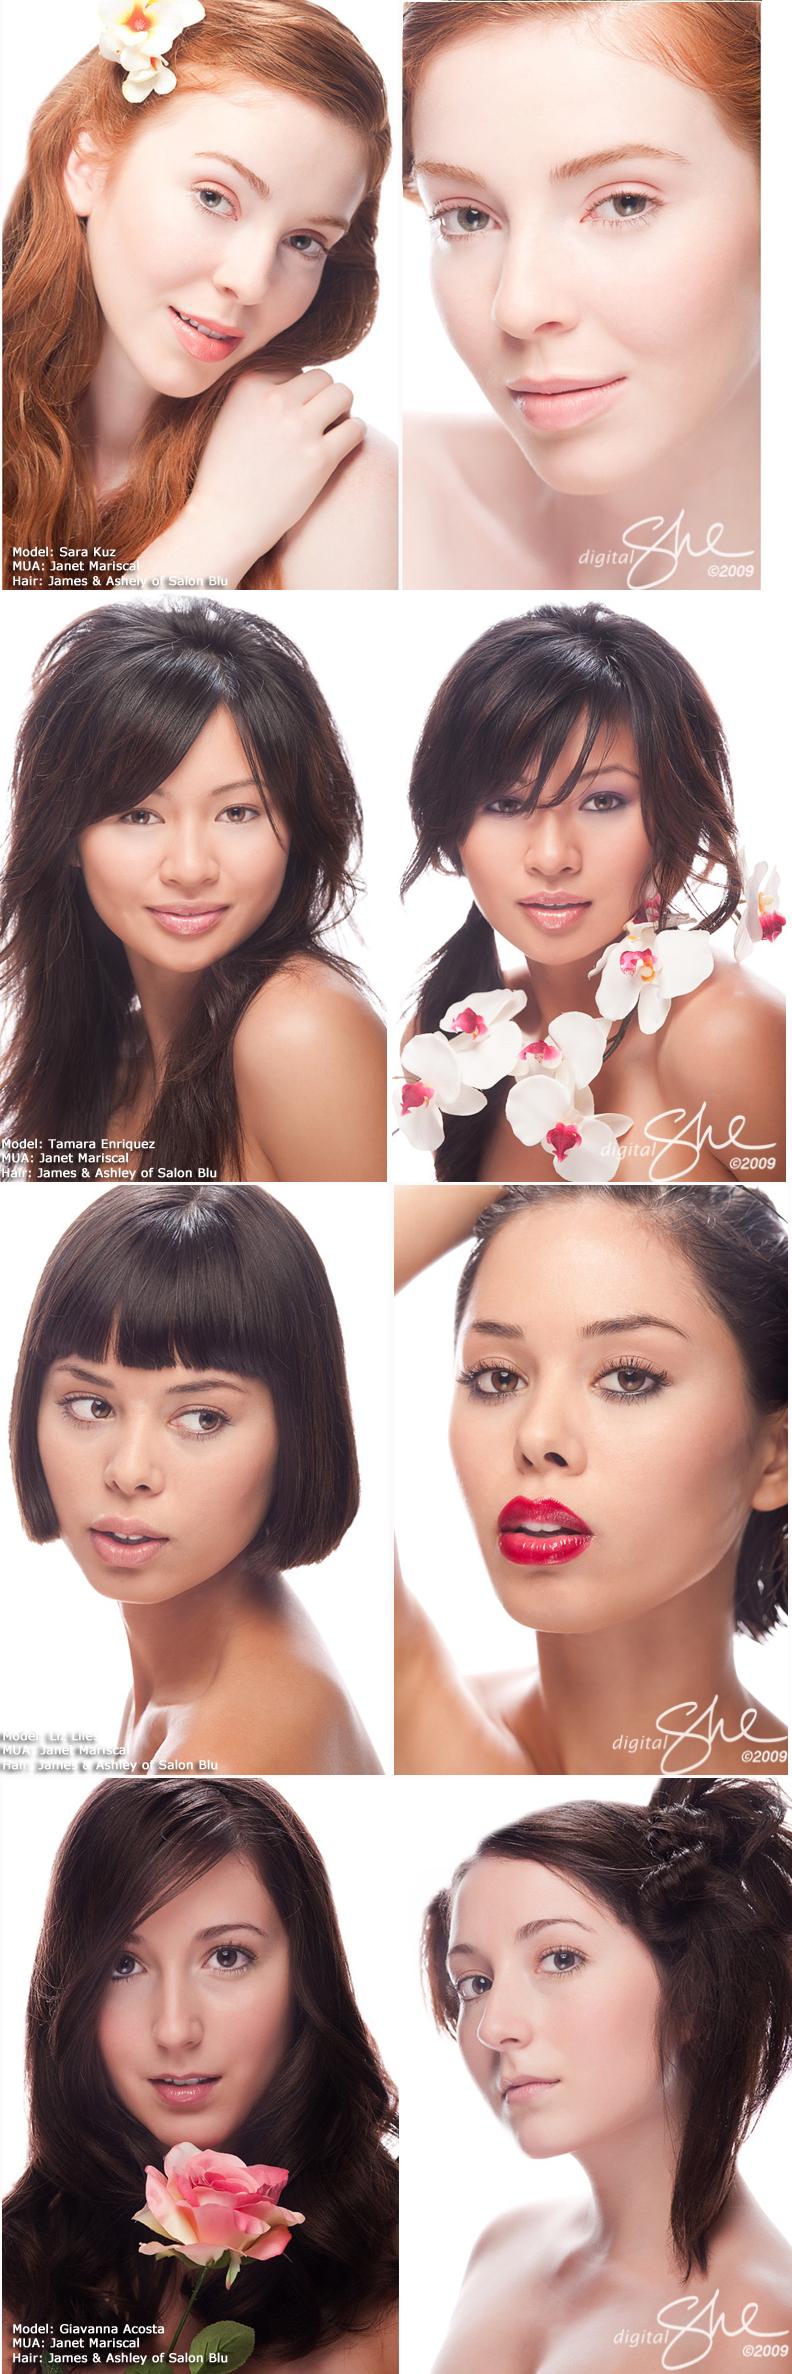 Female model photo shoot of JANET MARISCAL, maraenriquez, liz liles, Sara Kuz and Gia by digitalShe in sweetlights studio sf, hair styled by Salon Blu and BBB